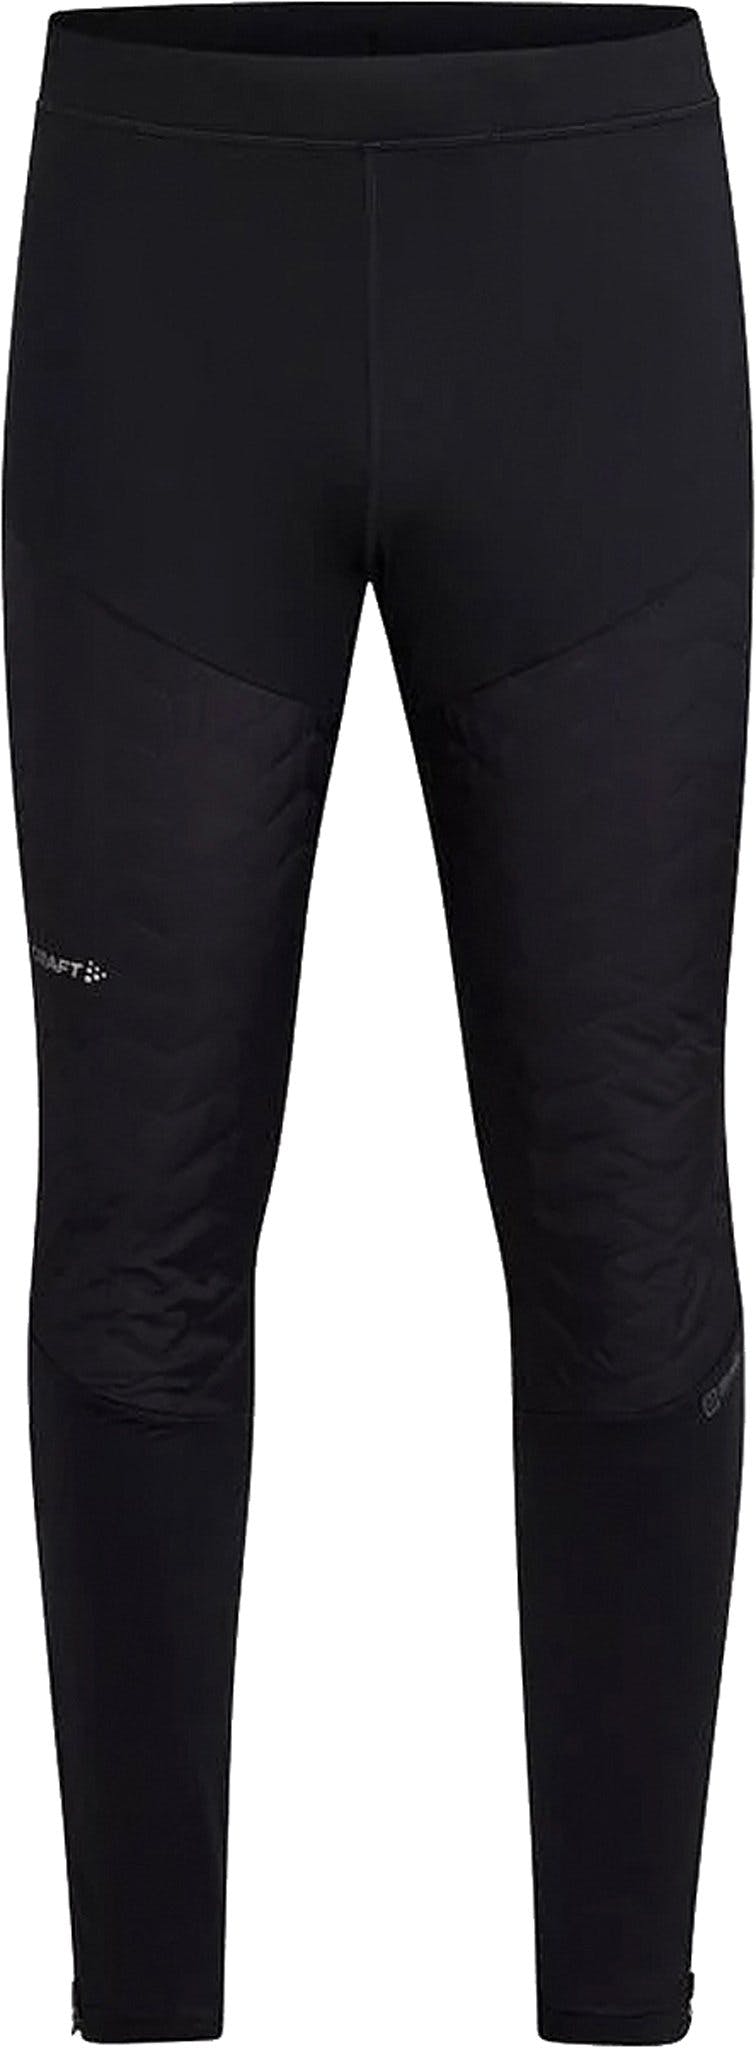 Product image for ADV SubZ 3 Tights - Men's